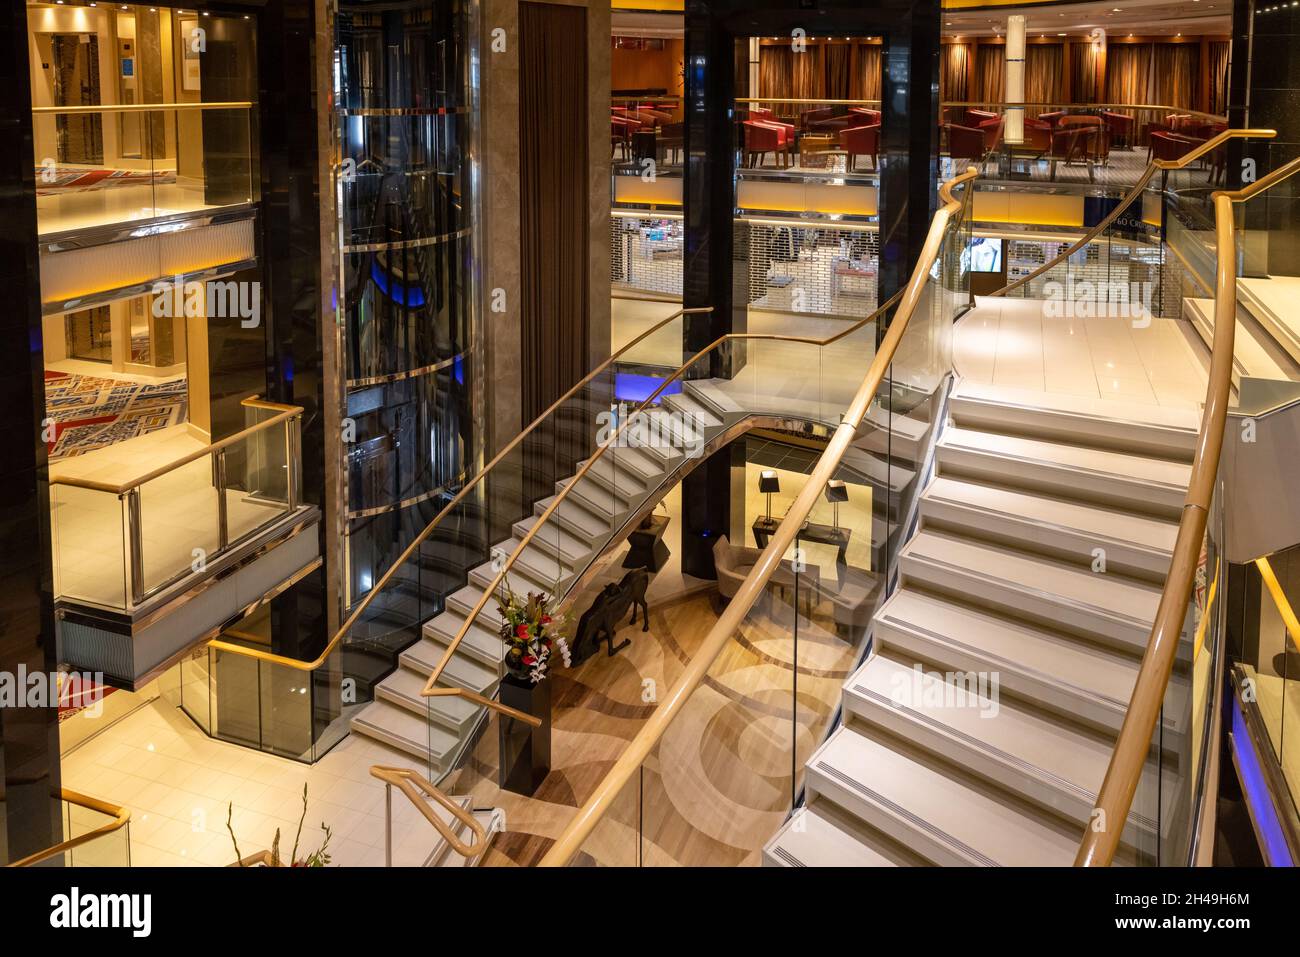 Southampton, UK - 30th September 2021: The luxury P and O cruise ship Ventura. Interior shot of the glass atrium and stairways in the centre or the sh Stock Photo